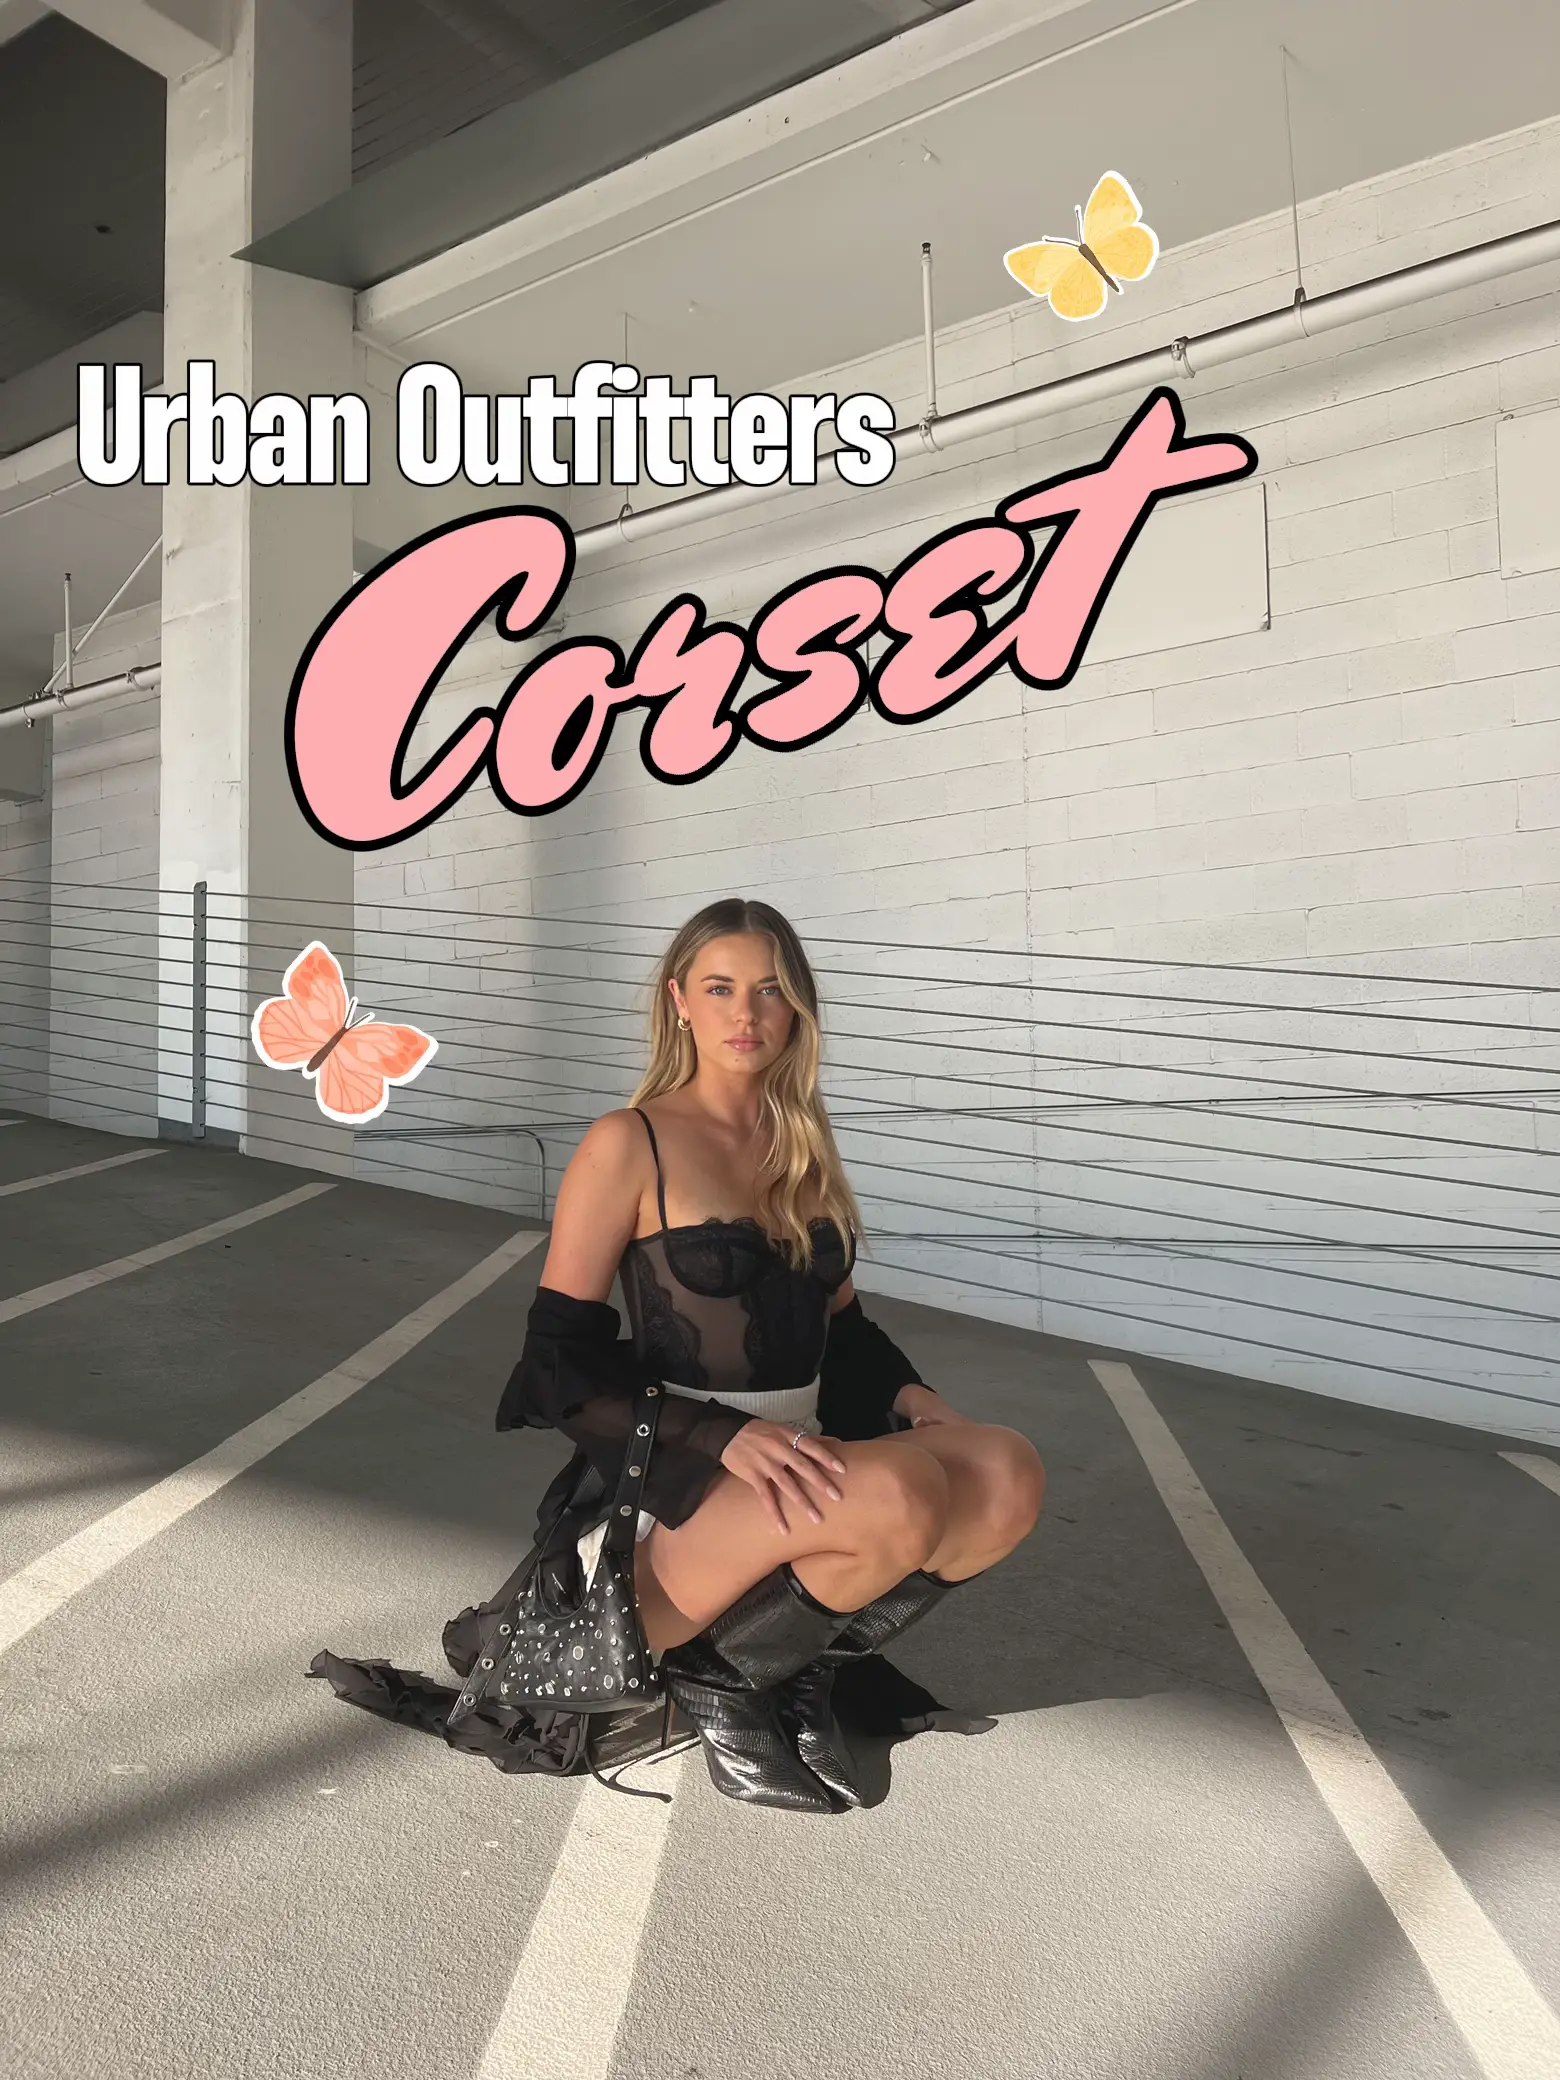 Urban Outfitters corset - Clothing